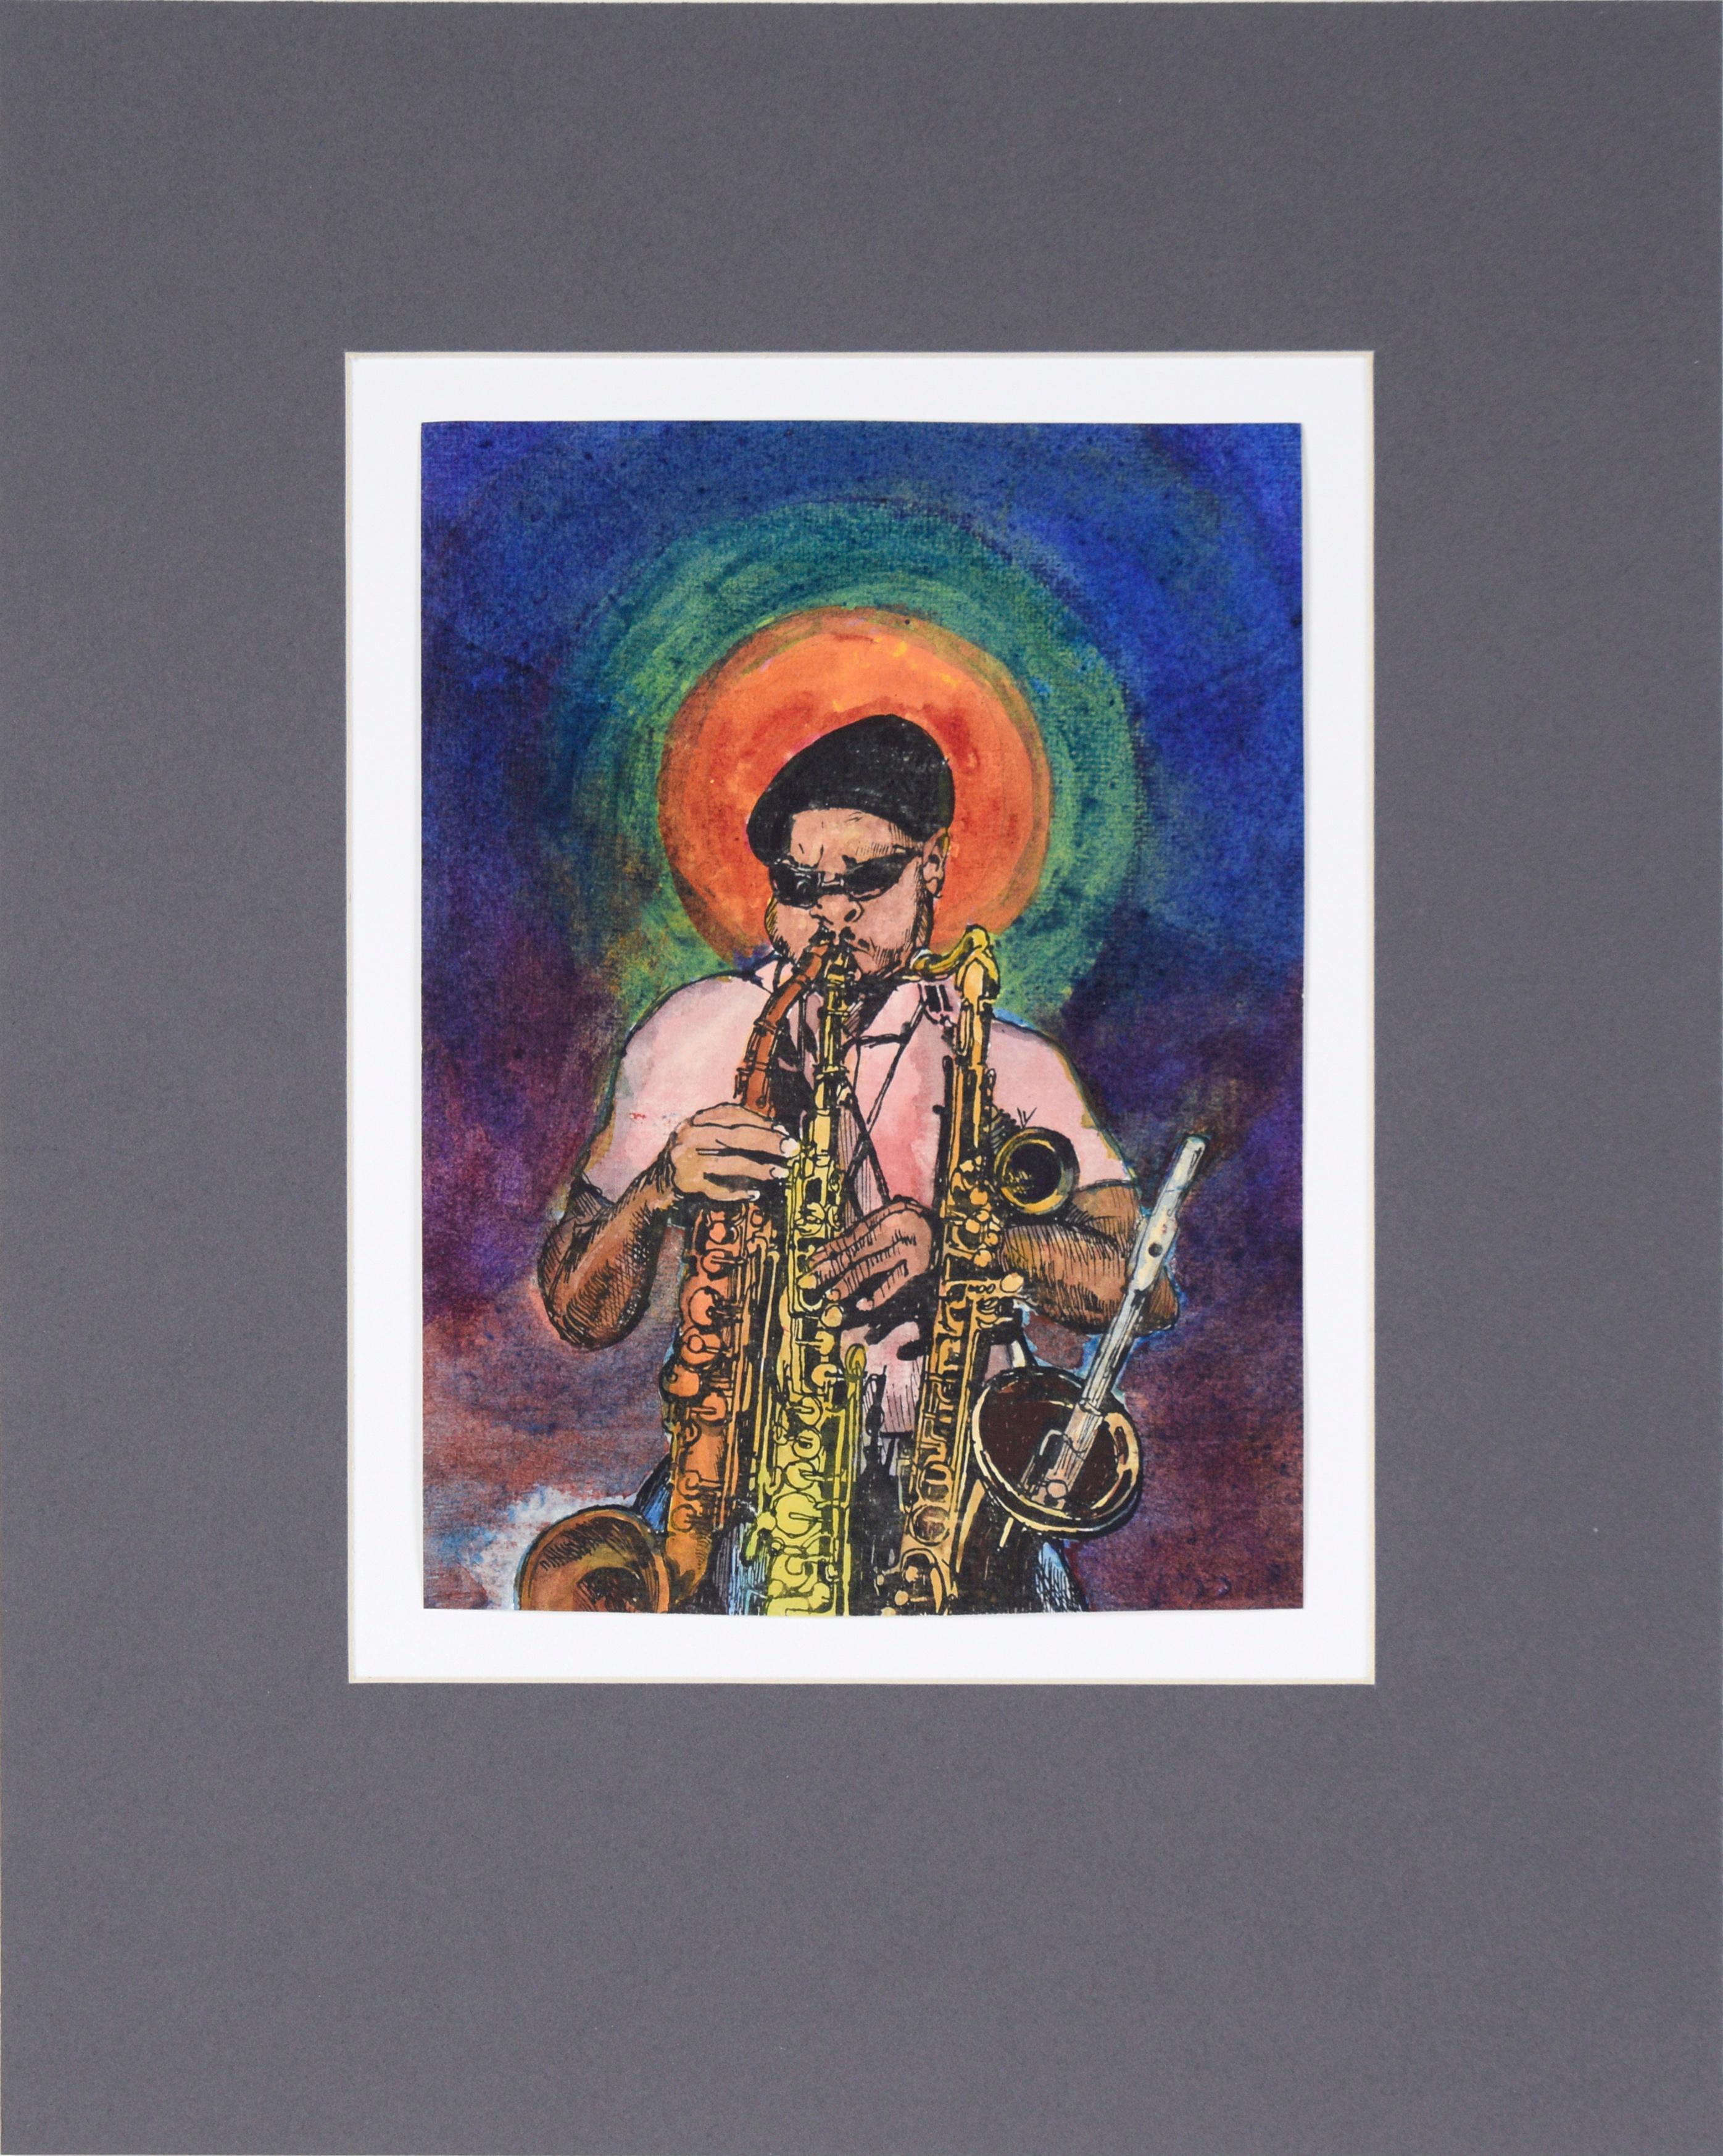 Brian Rounds Portrait - "Roland Kirk" - Figurative Ink and Watercolor of a Jazz Musician on Paper